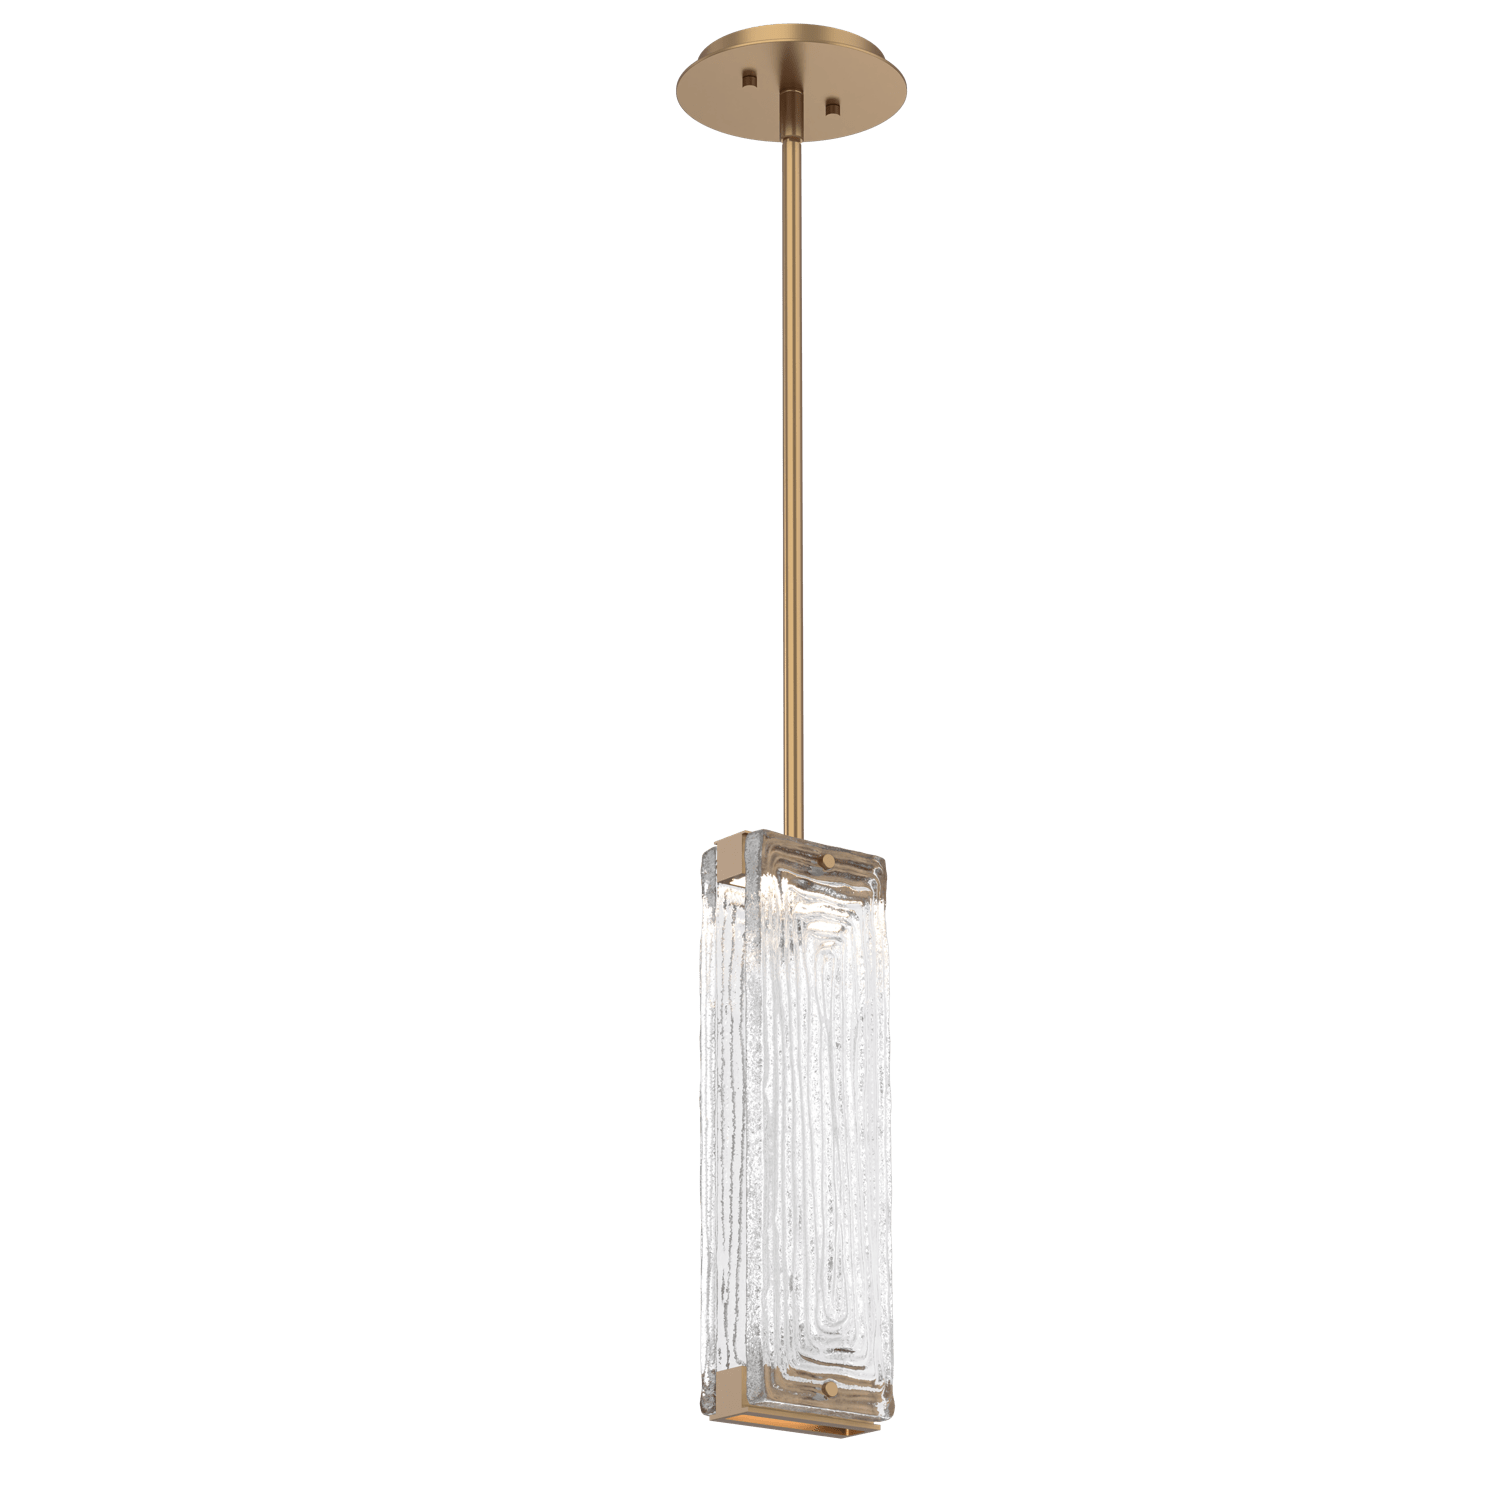 LAB0090-01-NB-TL-Hammerton-Studio-Tabulo-pendant-light-with-novel-brass-finish-and-clear-linea-cast-glass-shade-and-LED-lamping